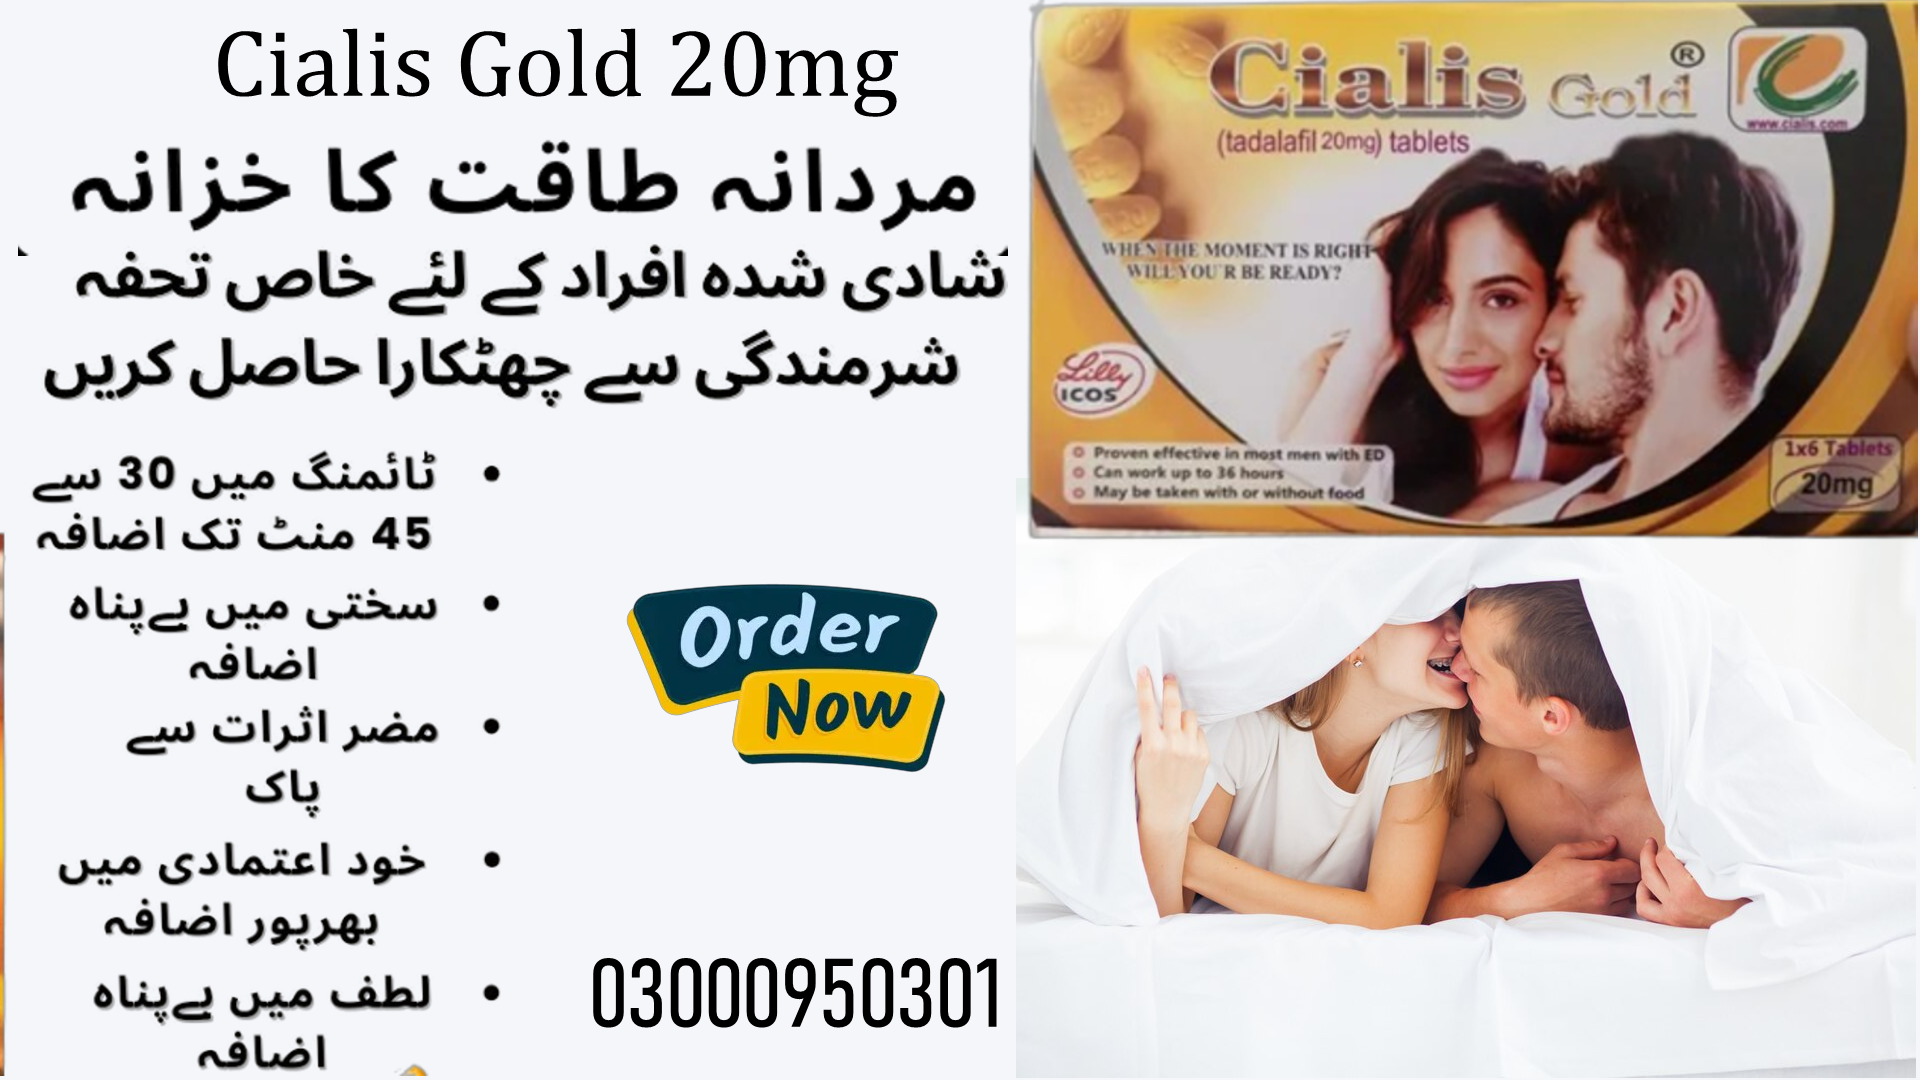 Cialis Gold 20mg In Lahore	03000950301,Islamabad, Pakistan,Services,Free Classifieds,Post Free Ads,77traders.com